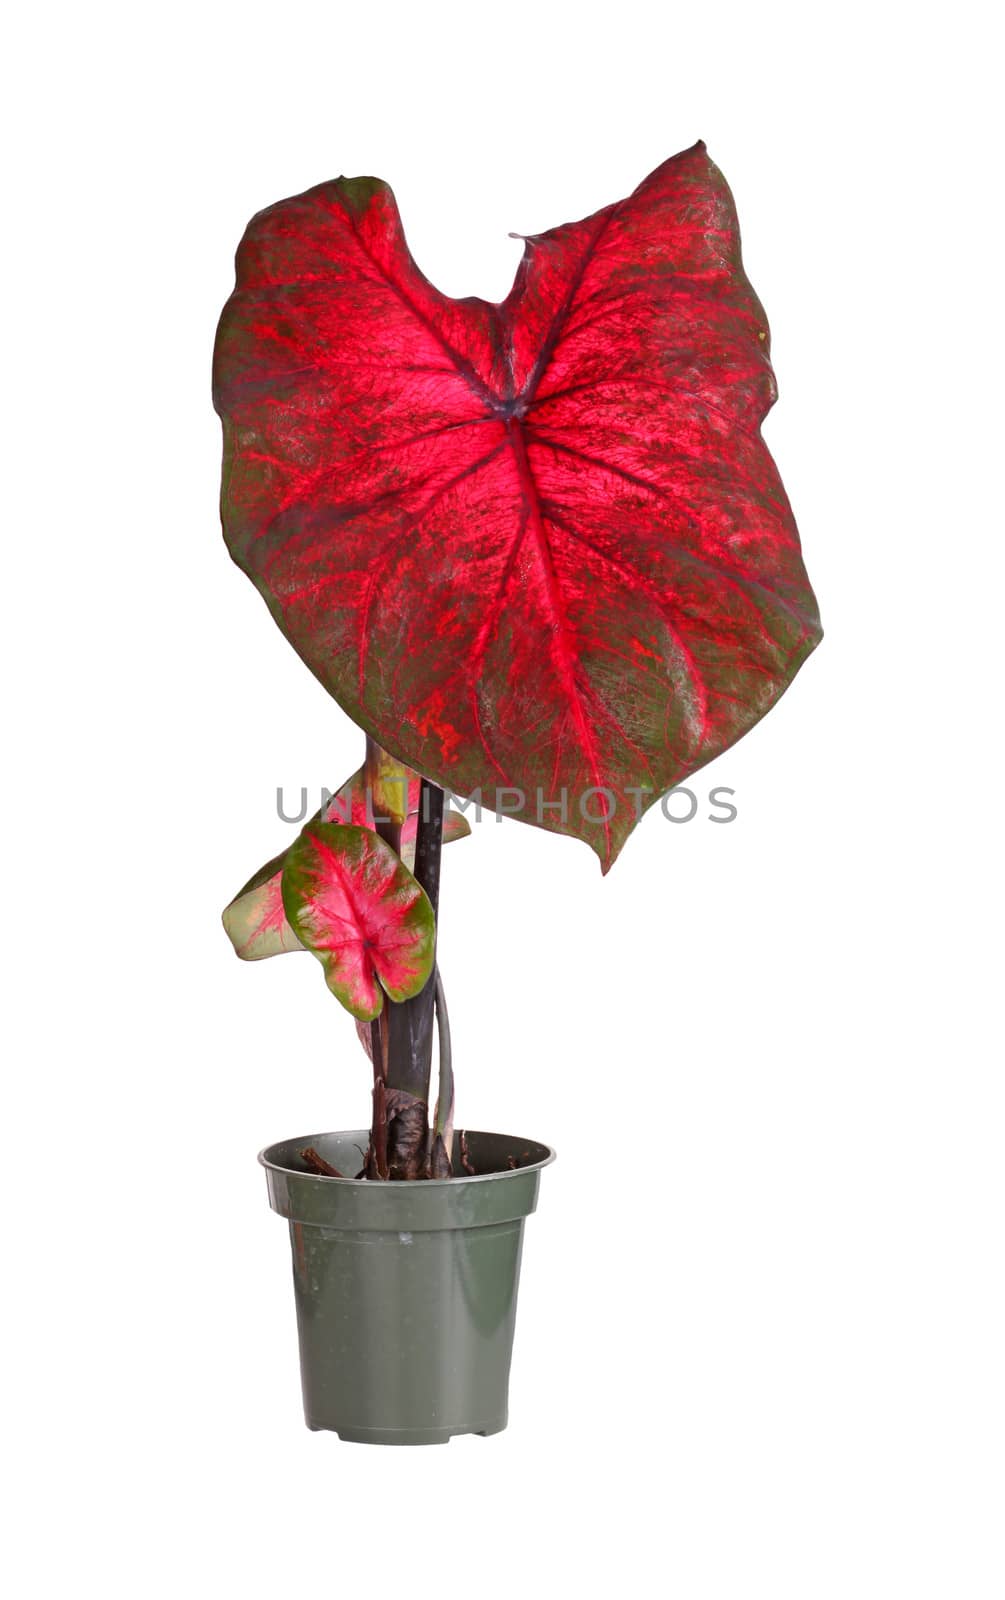 Small plant of a red-leaved caladium cultivar (Caladium bicolor) ready to be transplanted into a garden